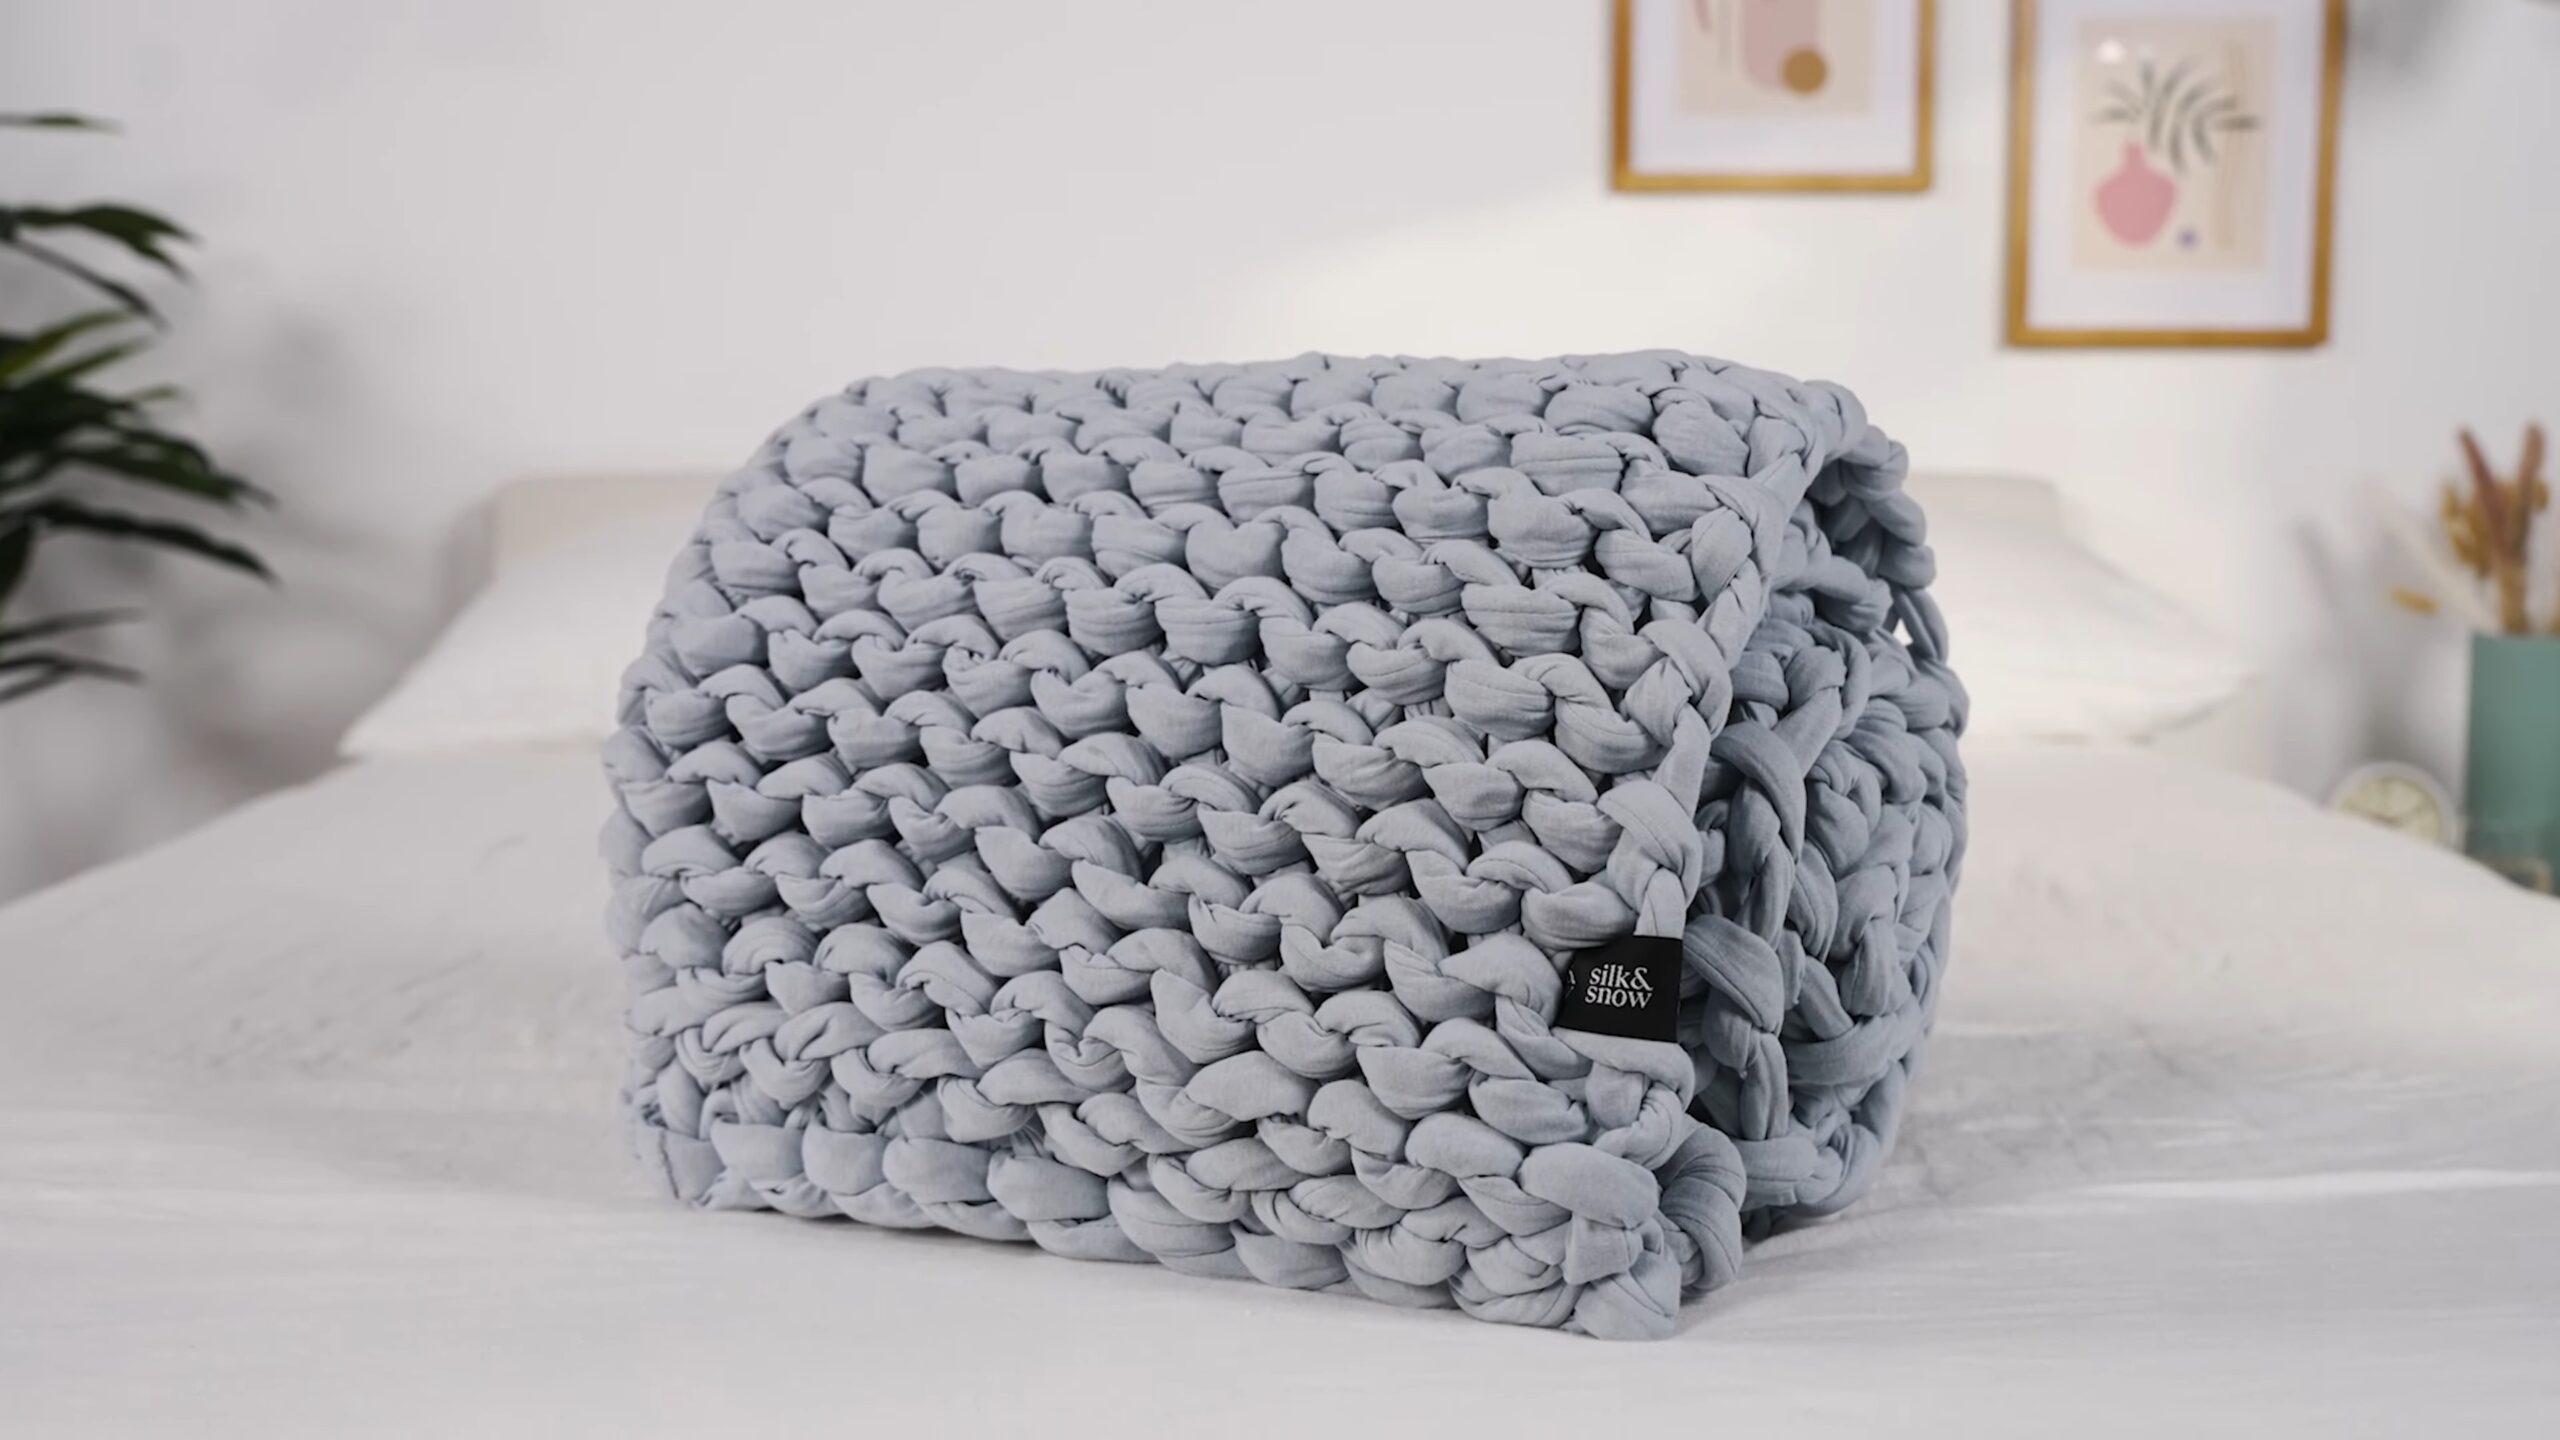 Weighted Blanket - Features